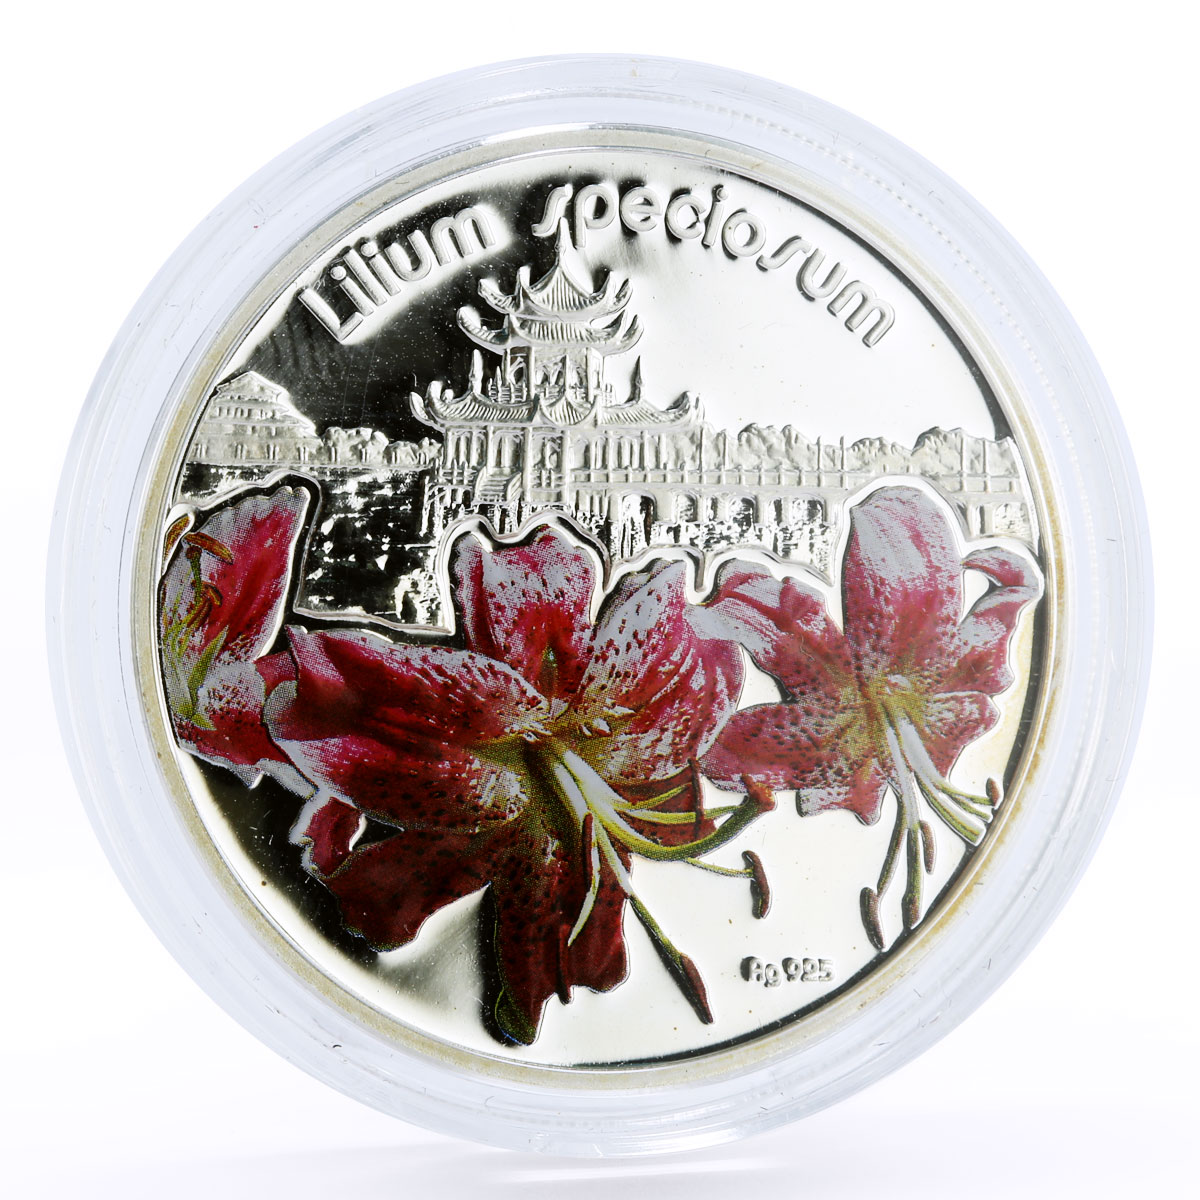 Niue set of 3 coins Magical Flowers Lillies colored proof silver coins 2012